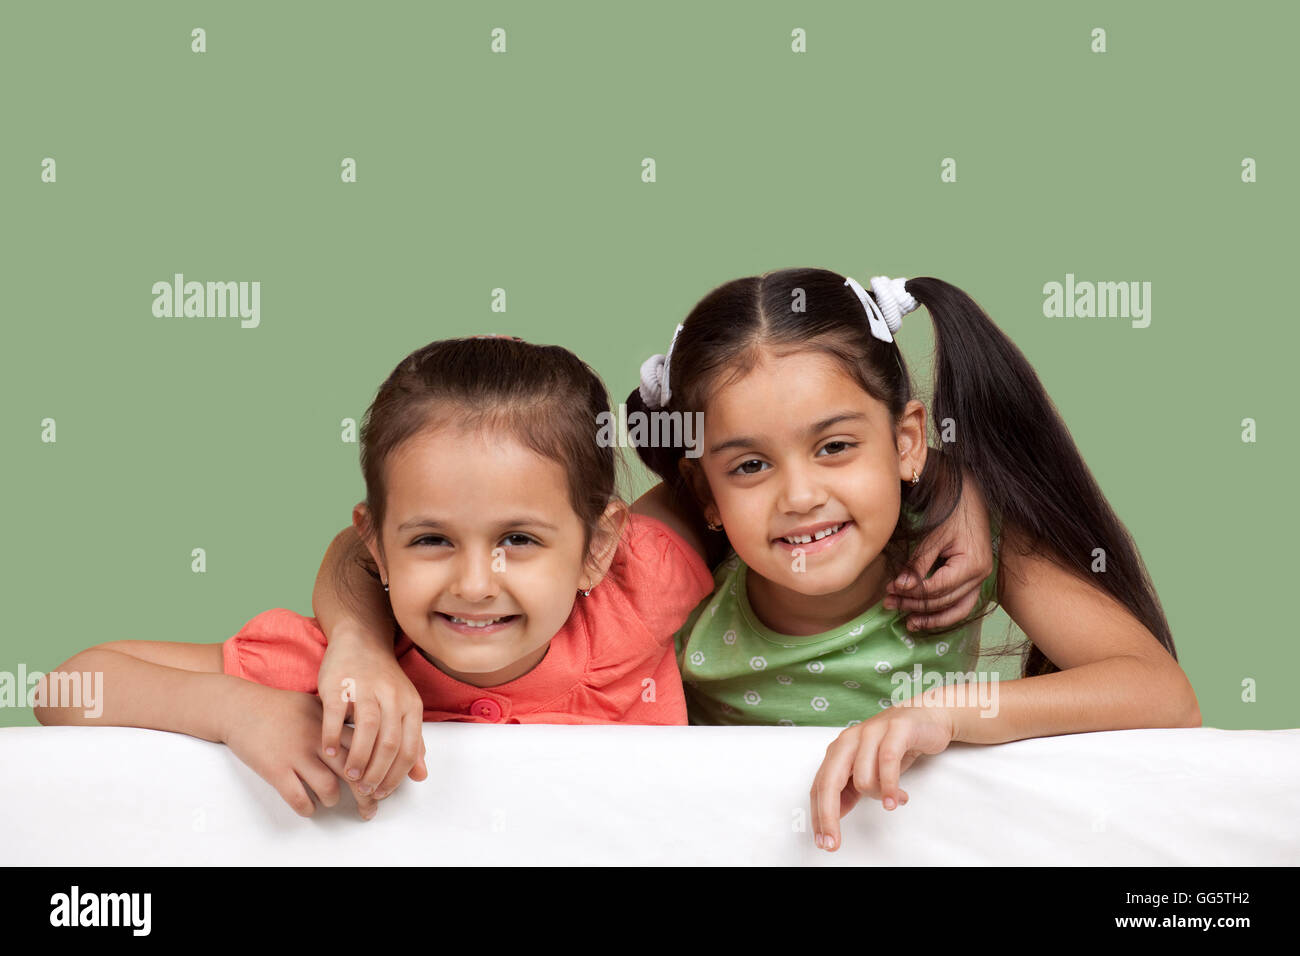 Portrait of smiling sisters over colored background Stock Photo